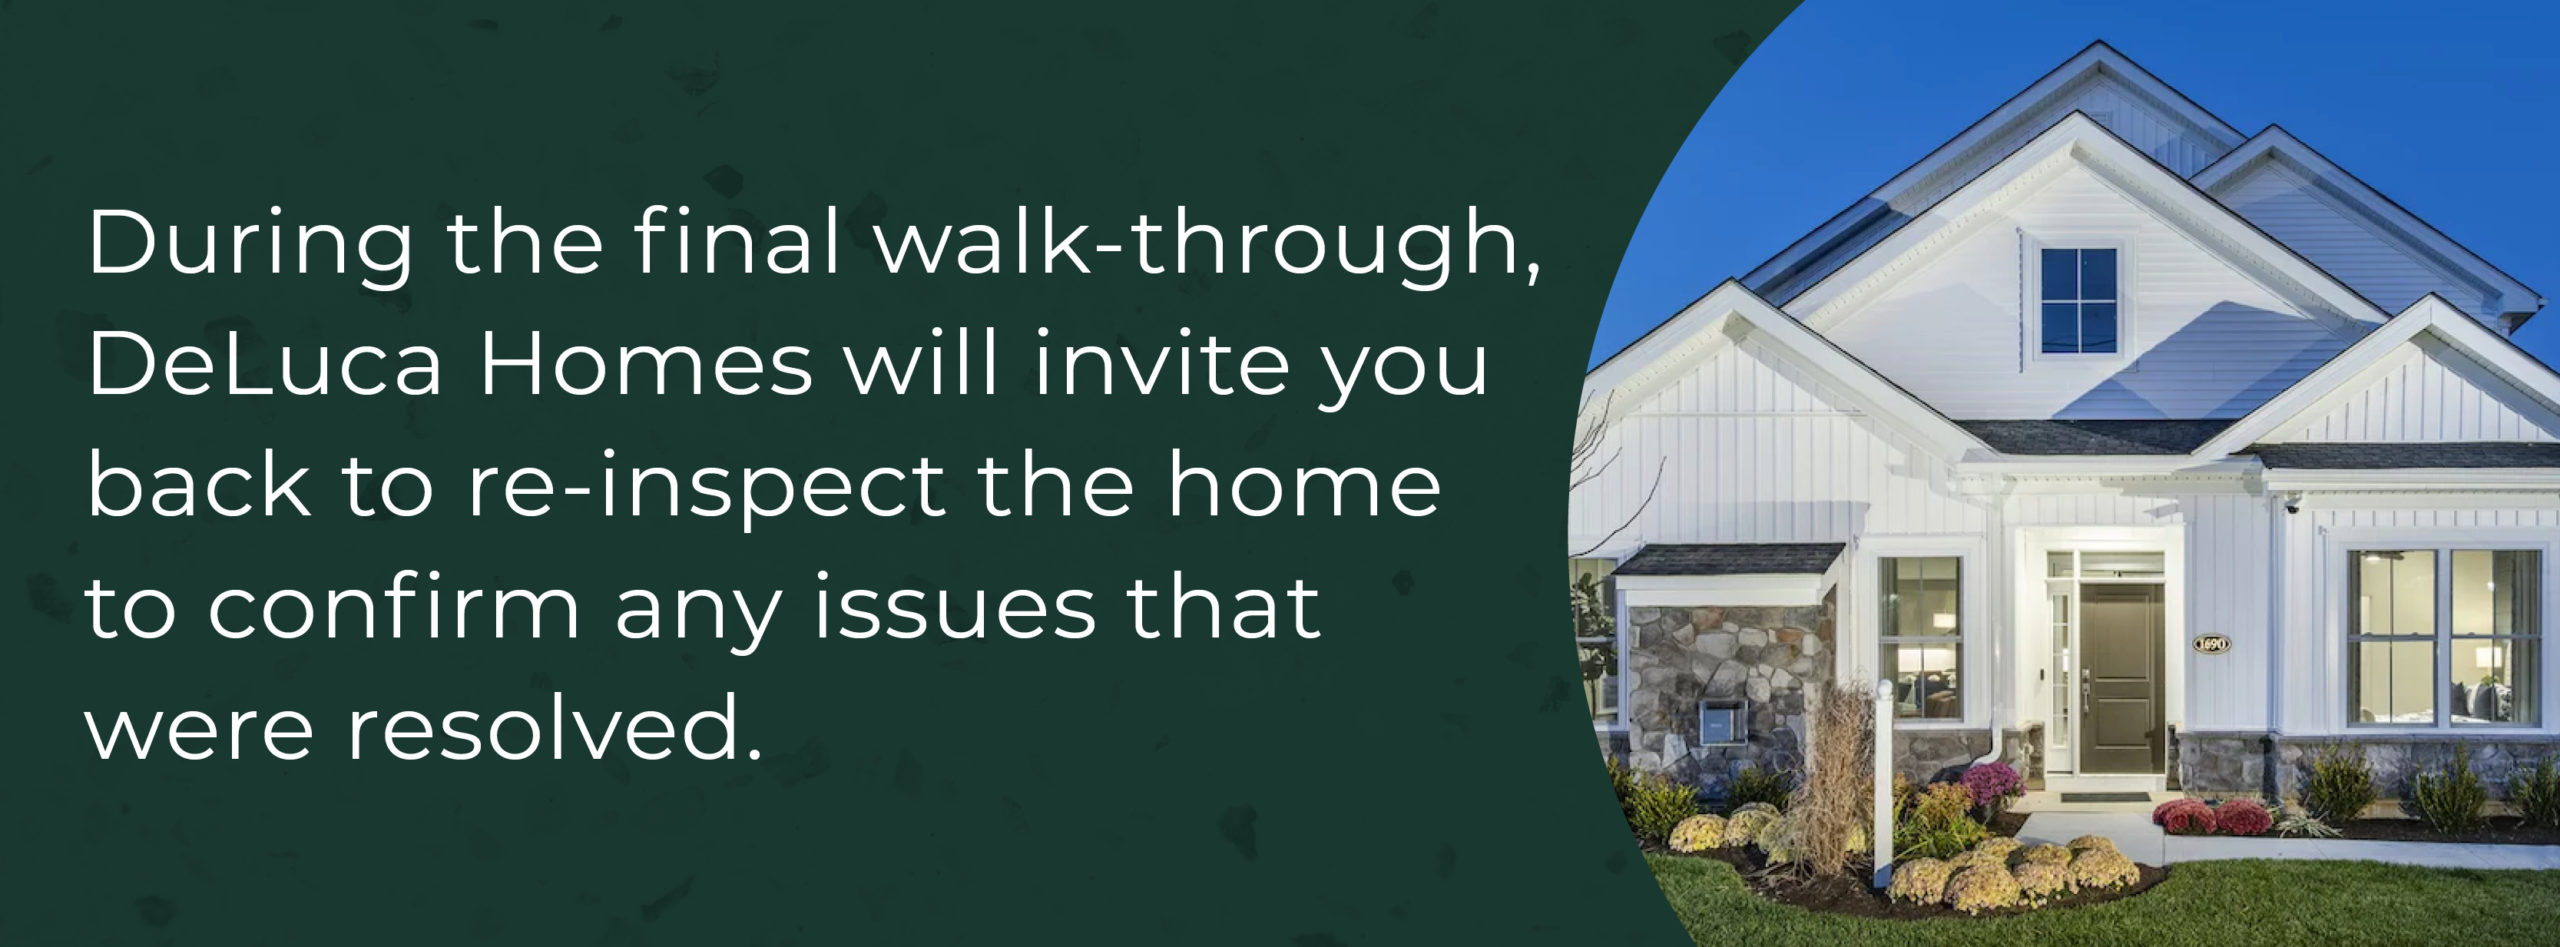 DeLuca Homes invites you to a final walk through to inspect the home